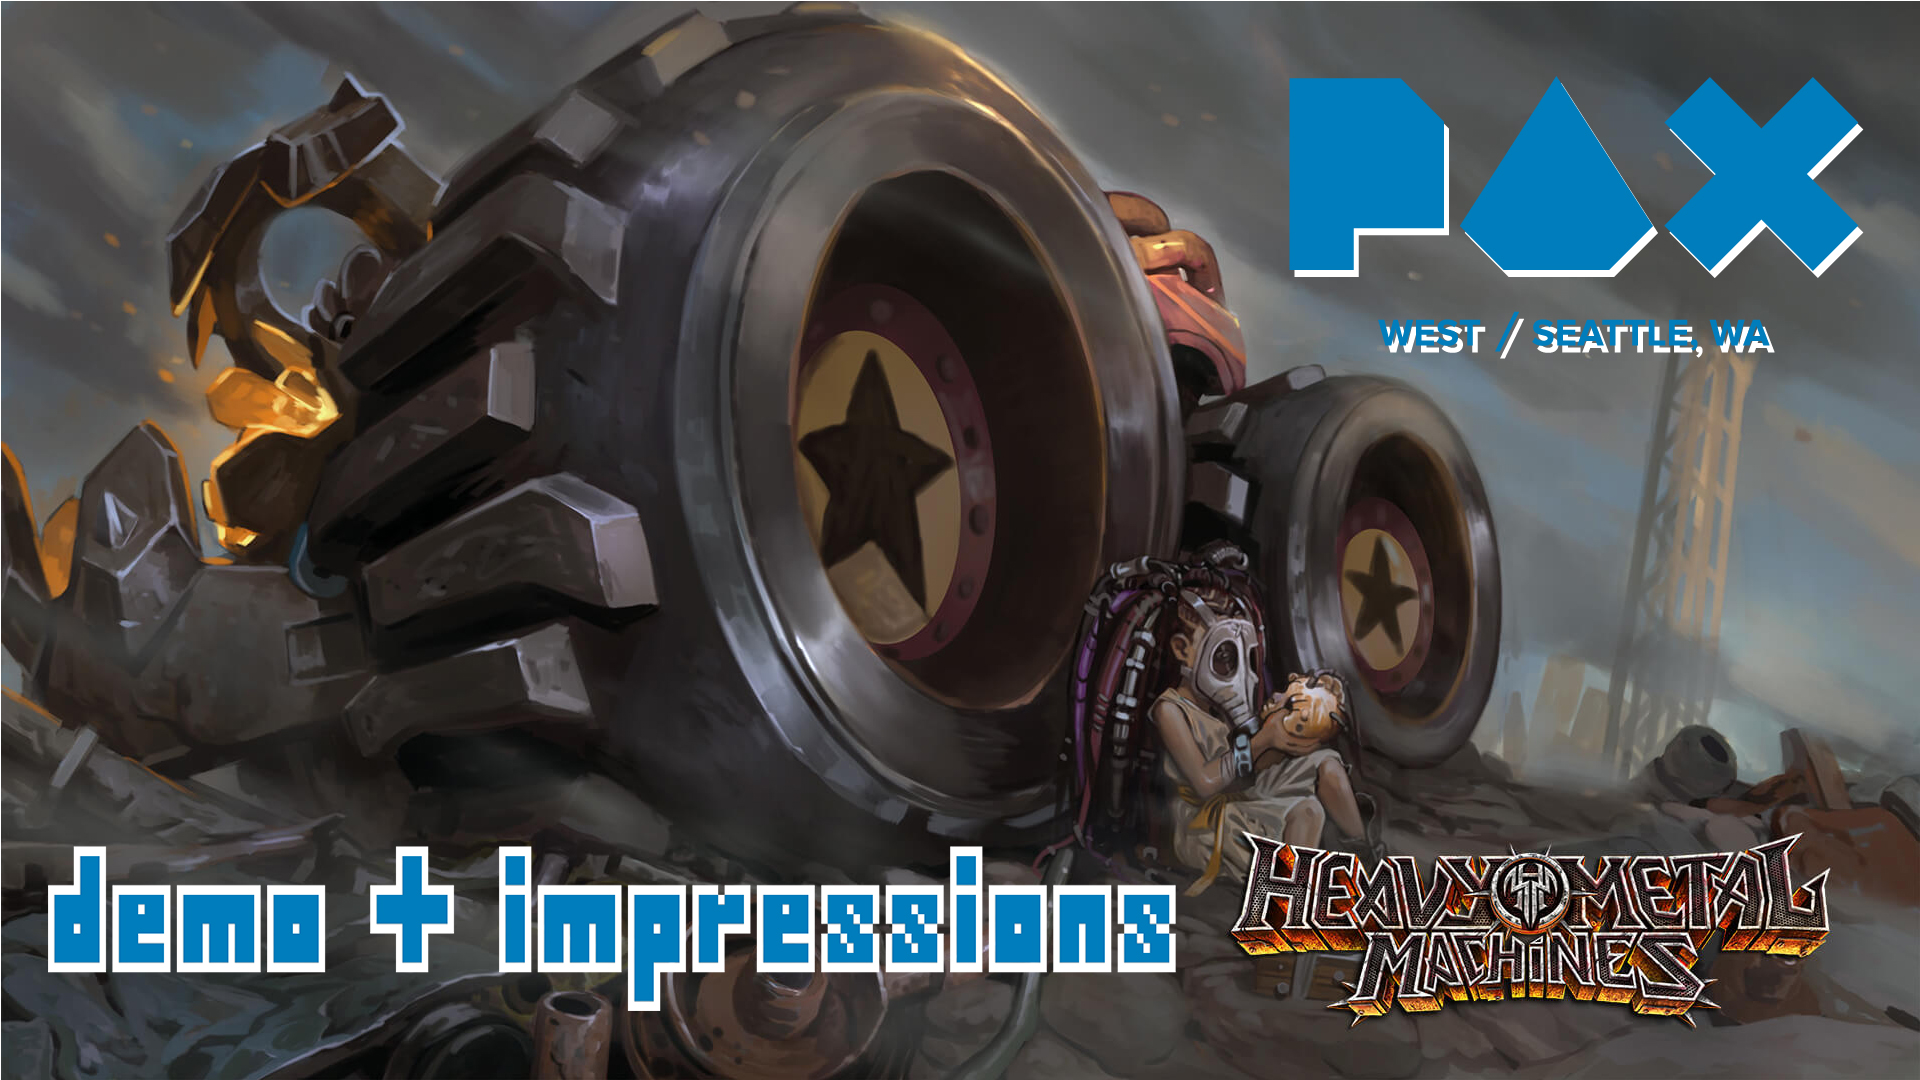 Heavy Metal Machines - PAX West 2016 Demo and Impressions